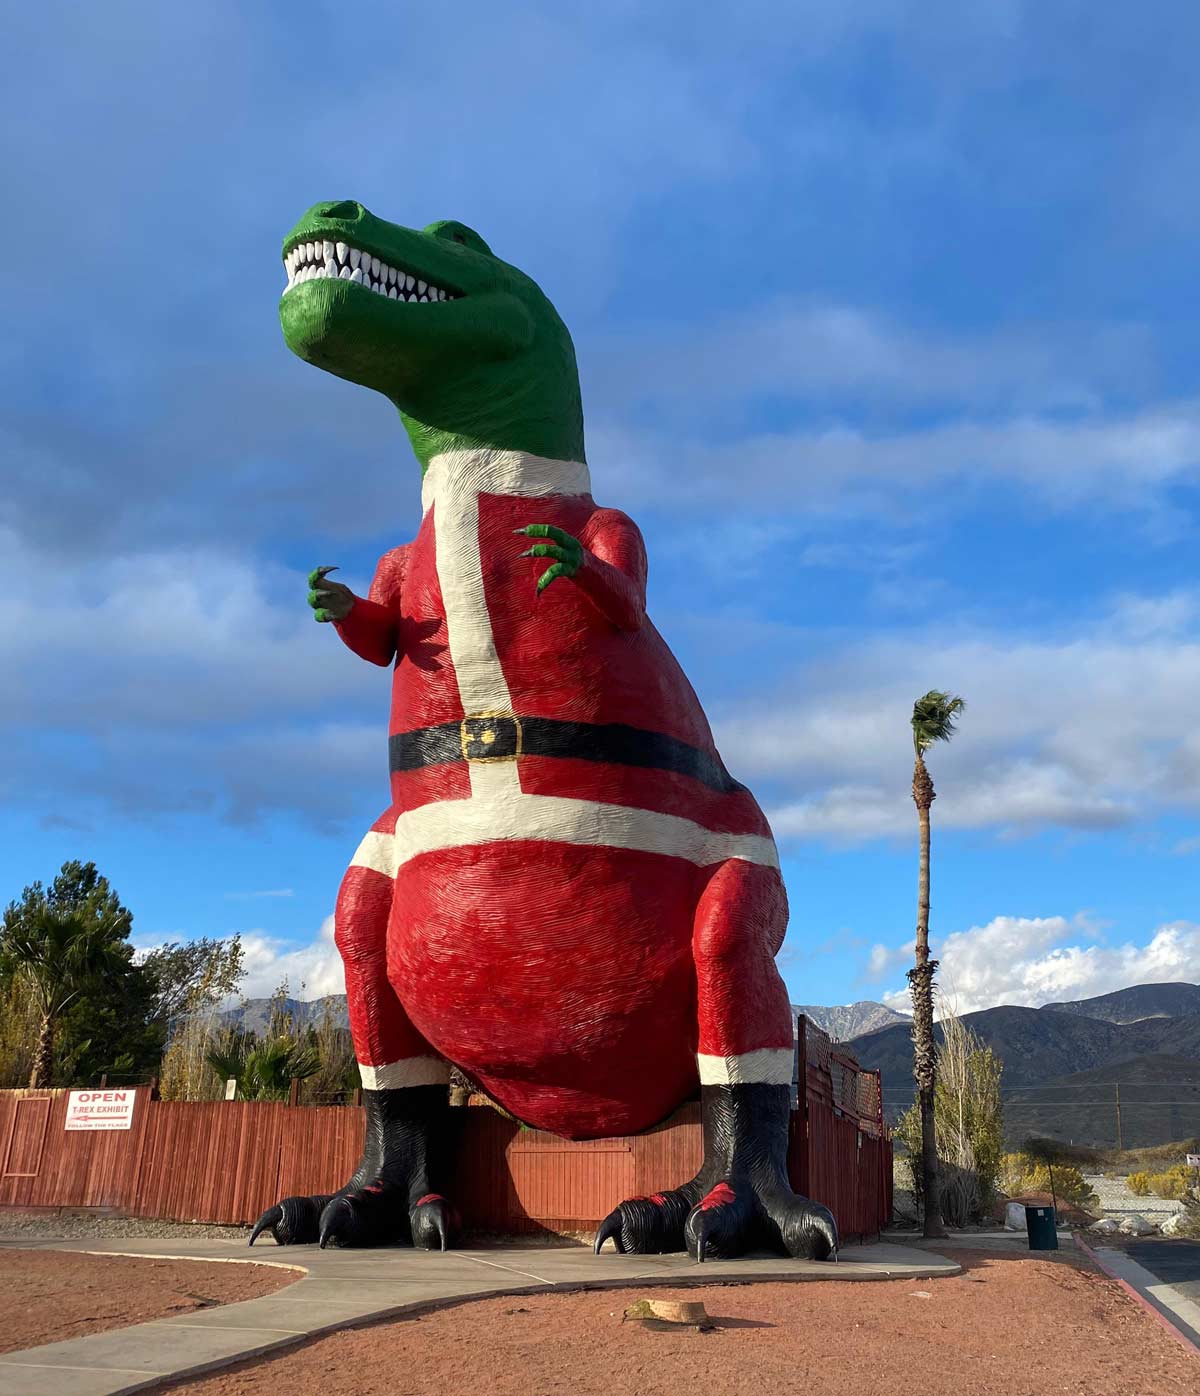 The dinosaur from Pee-Wee’s Big Adventure is dressed in a Santa suit during the holidays